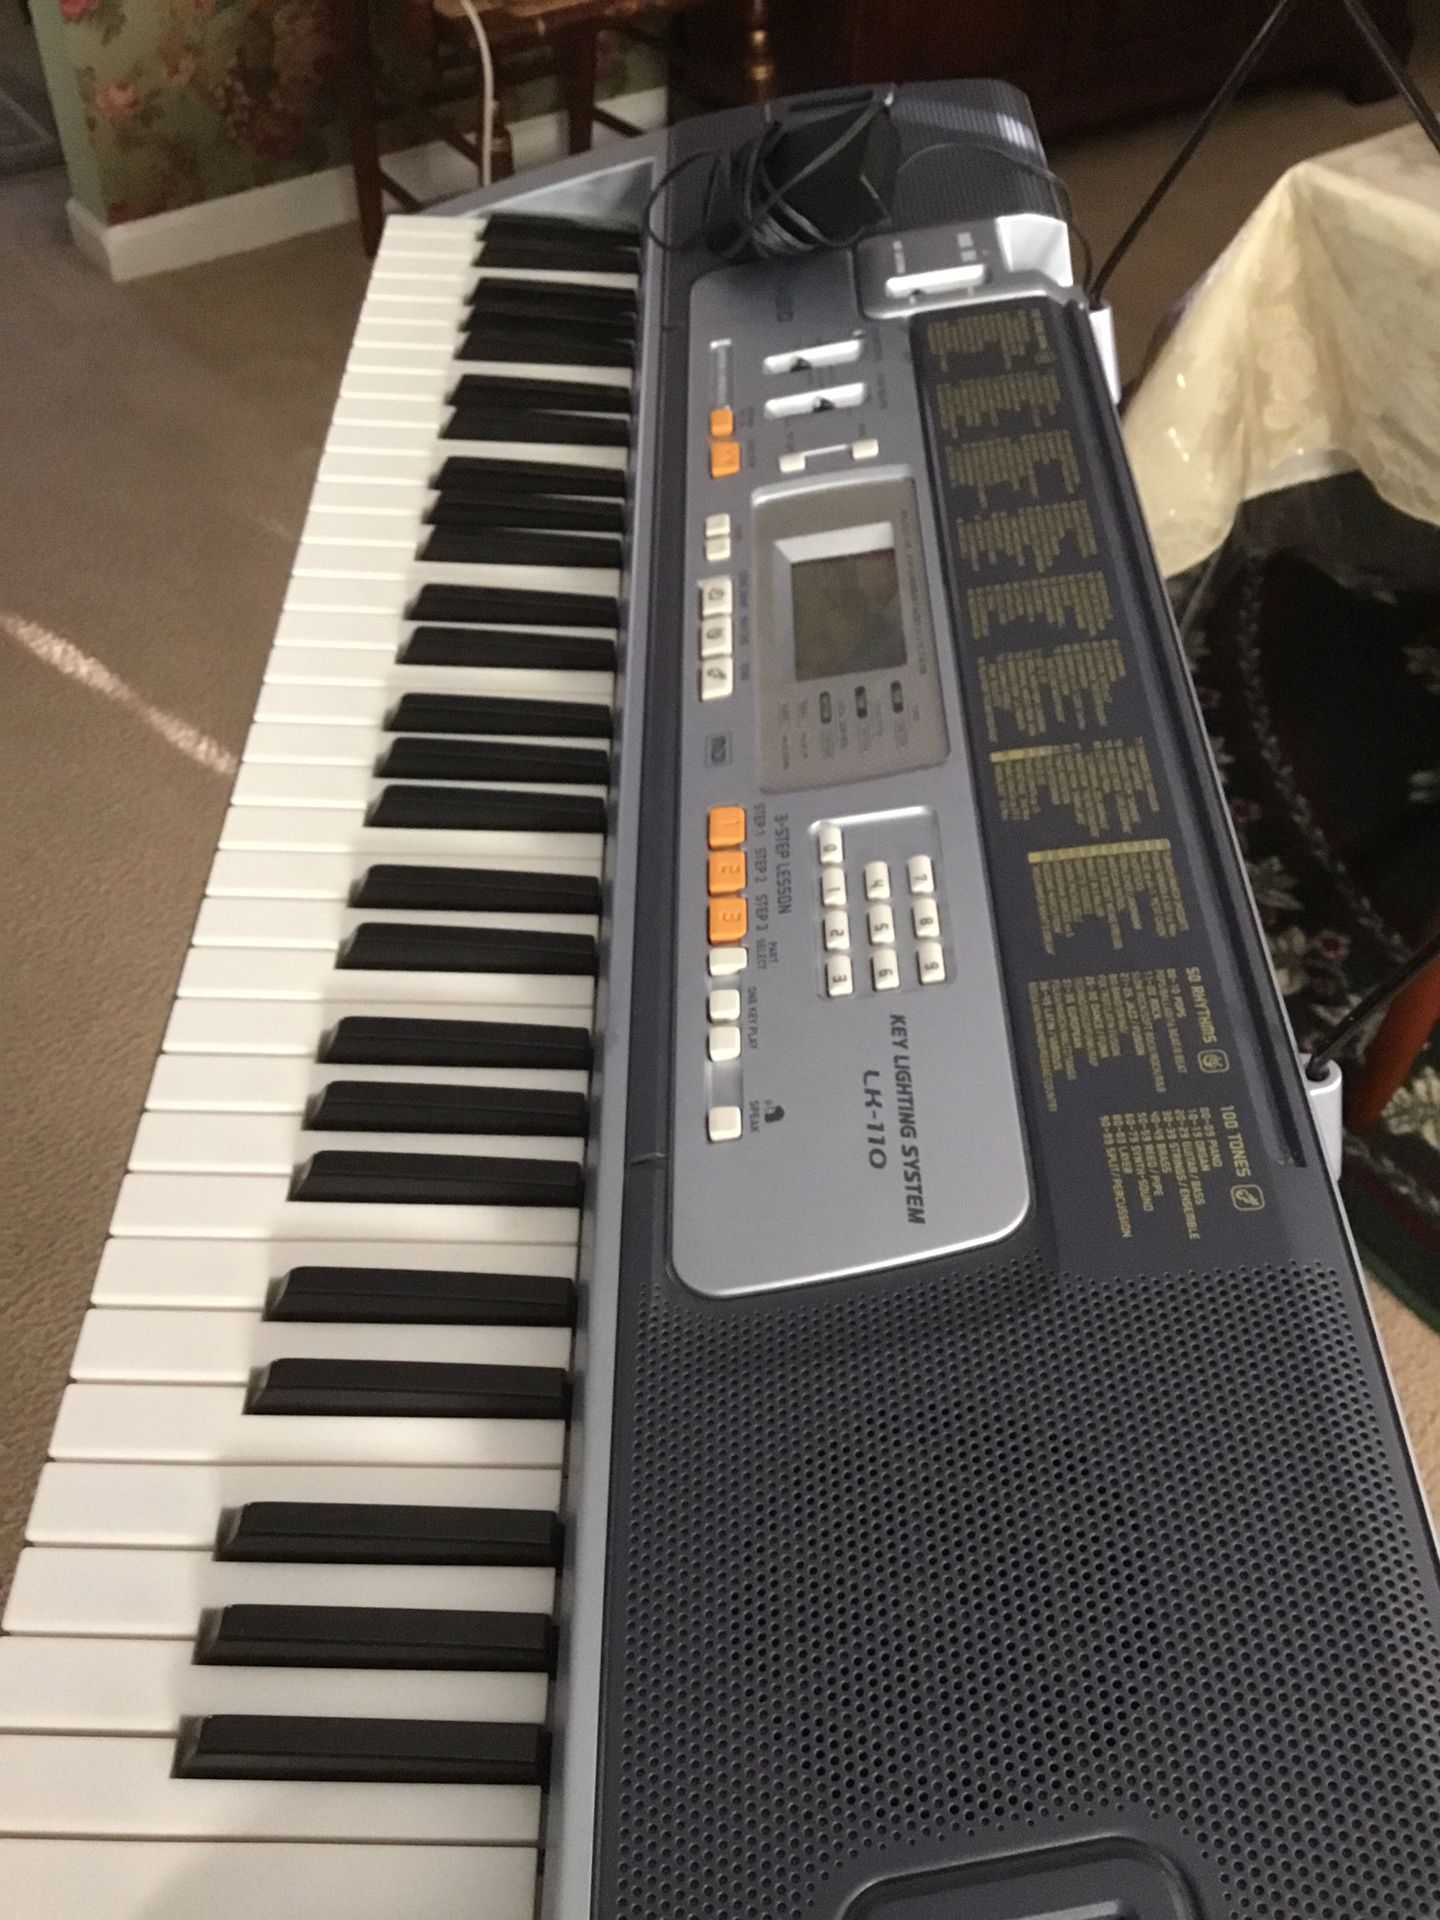 Casio Keyboard LK-110 w/Stand 100 Songs, 50 Rhythms, 100 Tones, 61 Keys. Plug In Has hairline crack in corner of frame. Ex..Cond. $75 for Sale in Taylors, SC - OfferUp